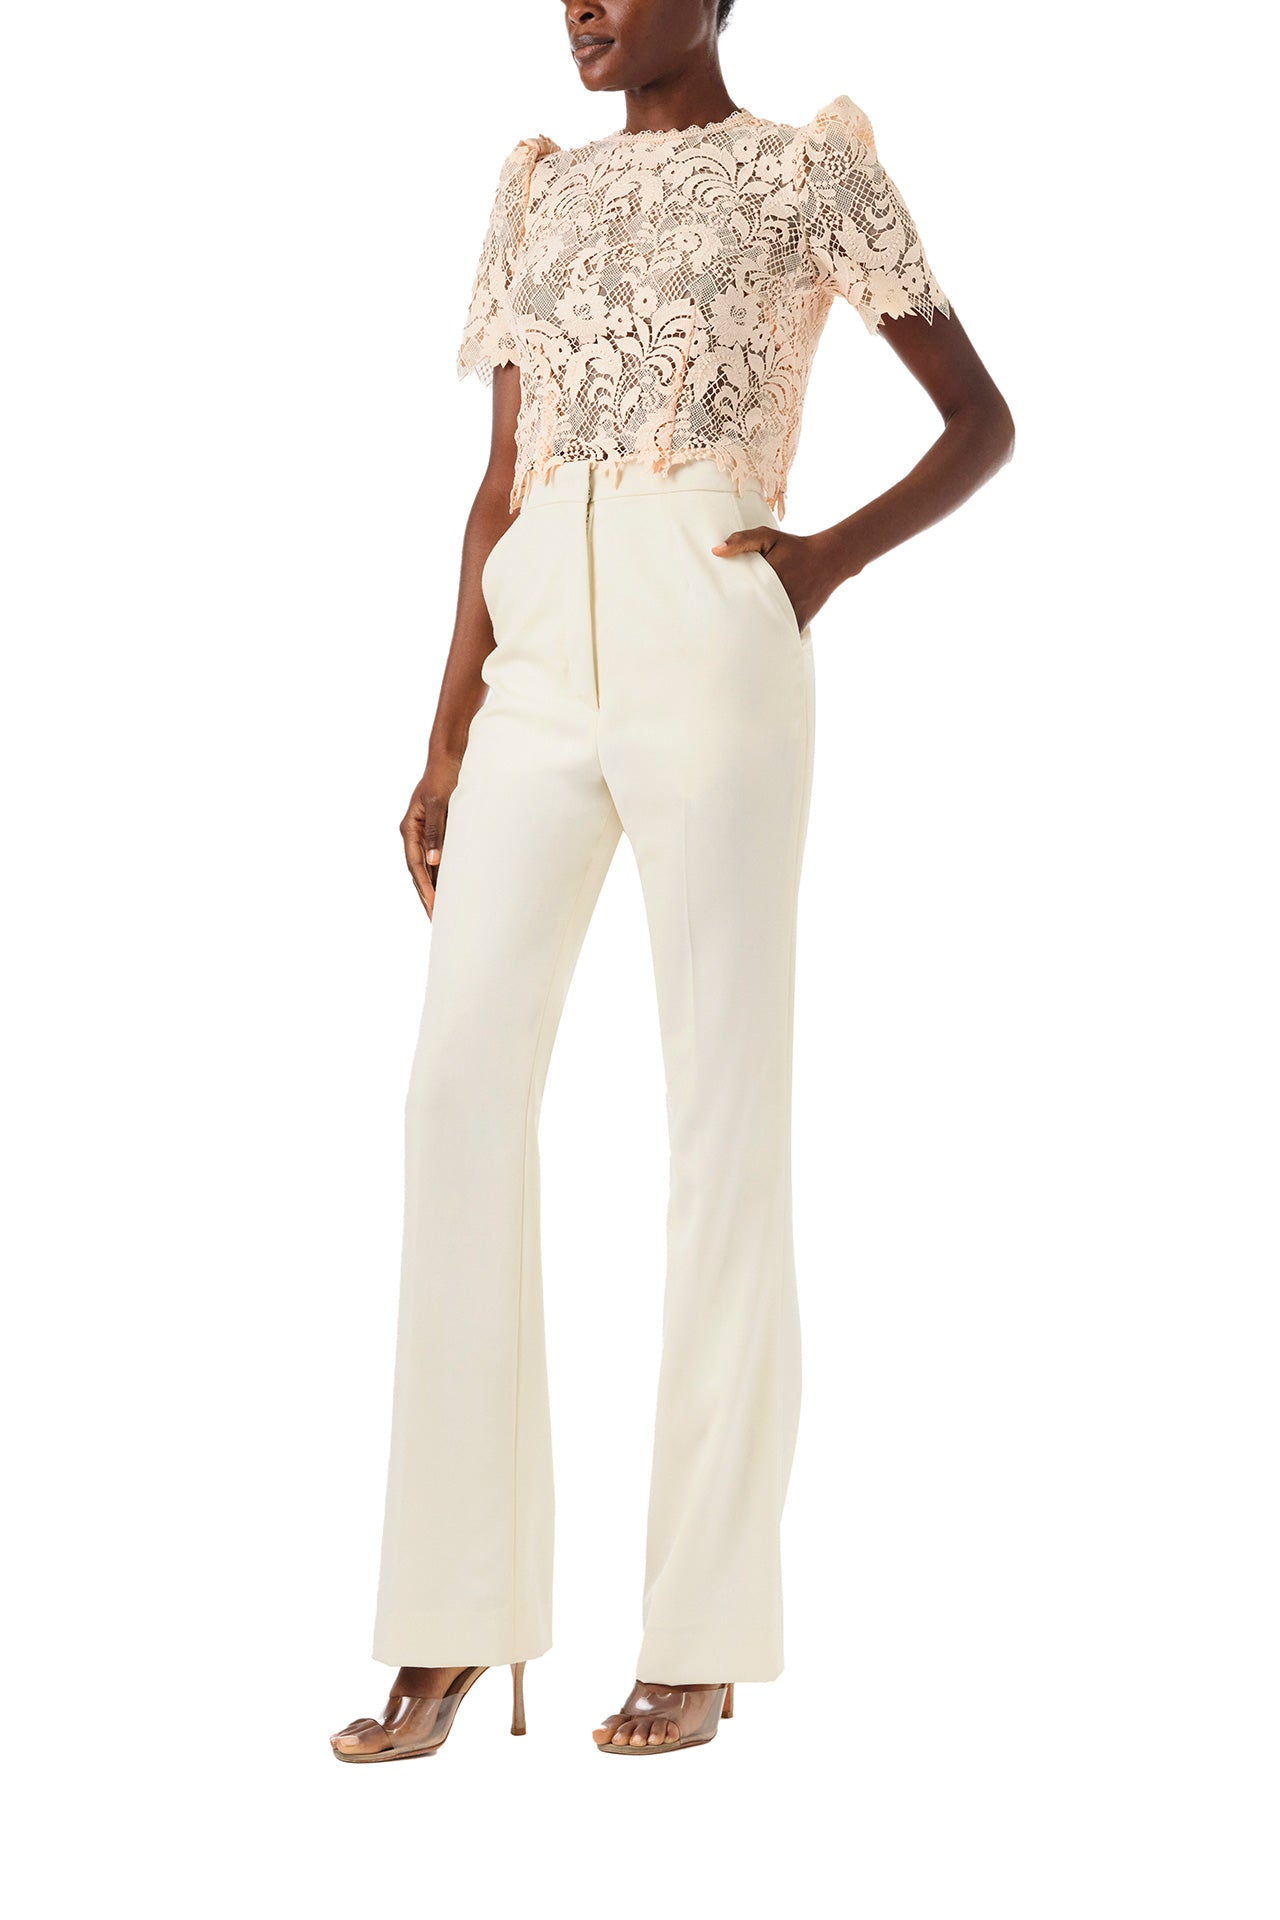 Monique Lhuillier Spring 2024 blush lace short sleeve, jewel neck lace top with sculpted shoulder and lace scallop detailing - left side.